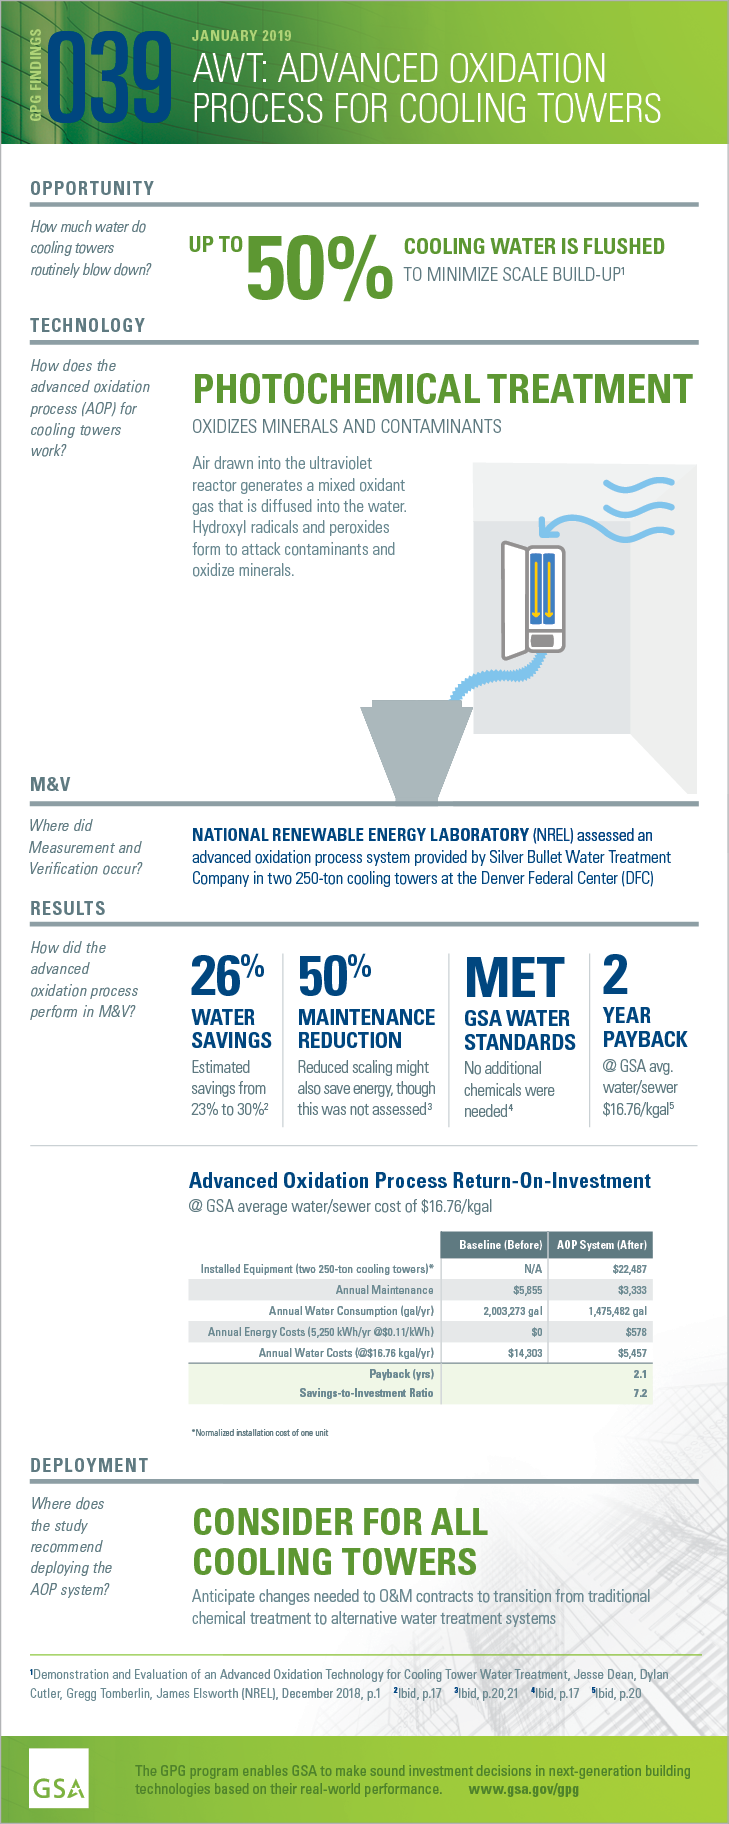 Download the PDF version of the full-sized infographic for GPG039 Advanced Oxidation Process.